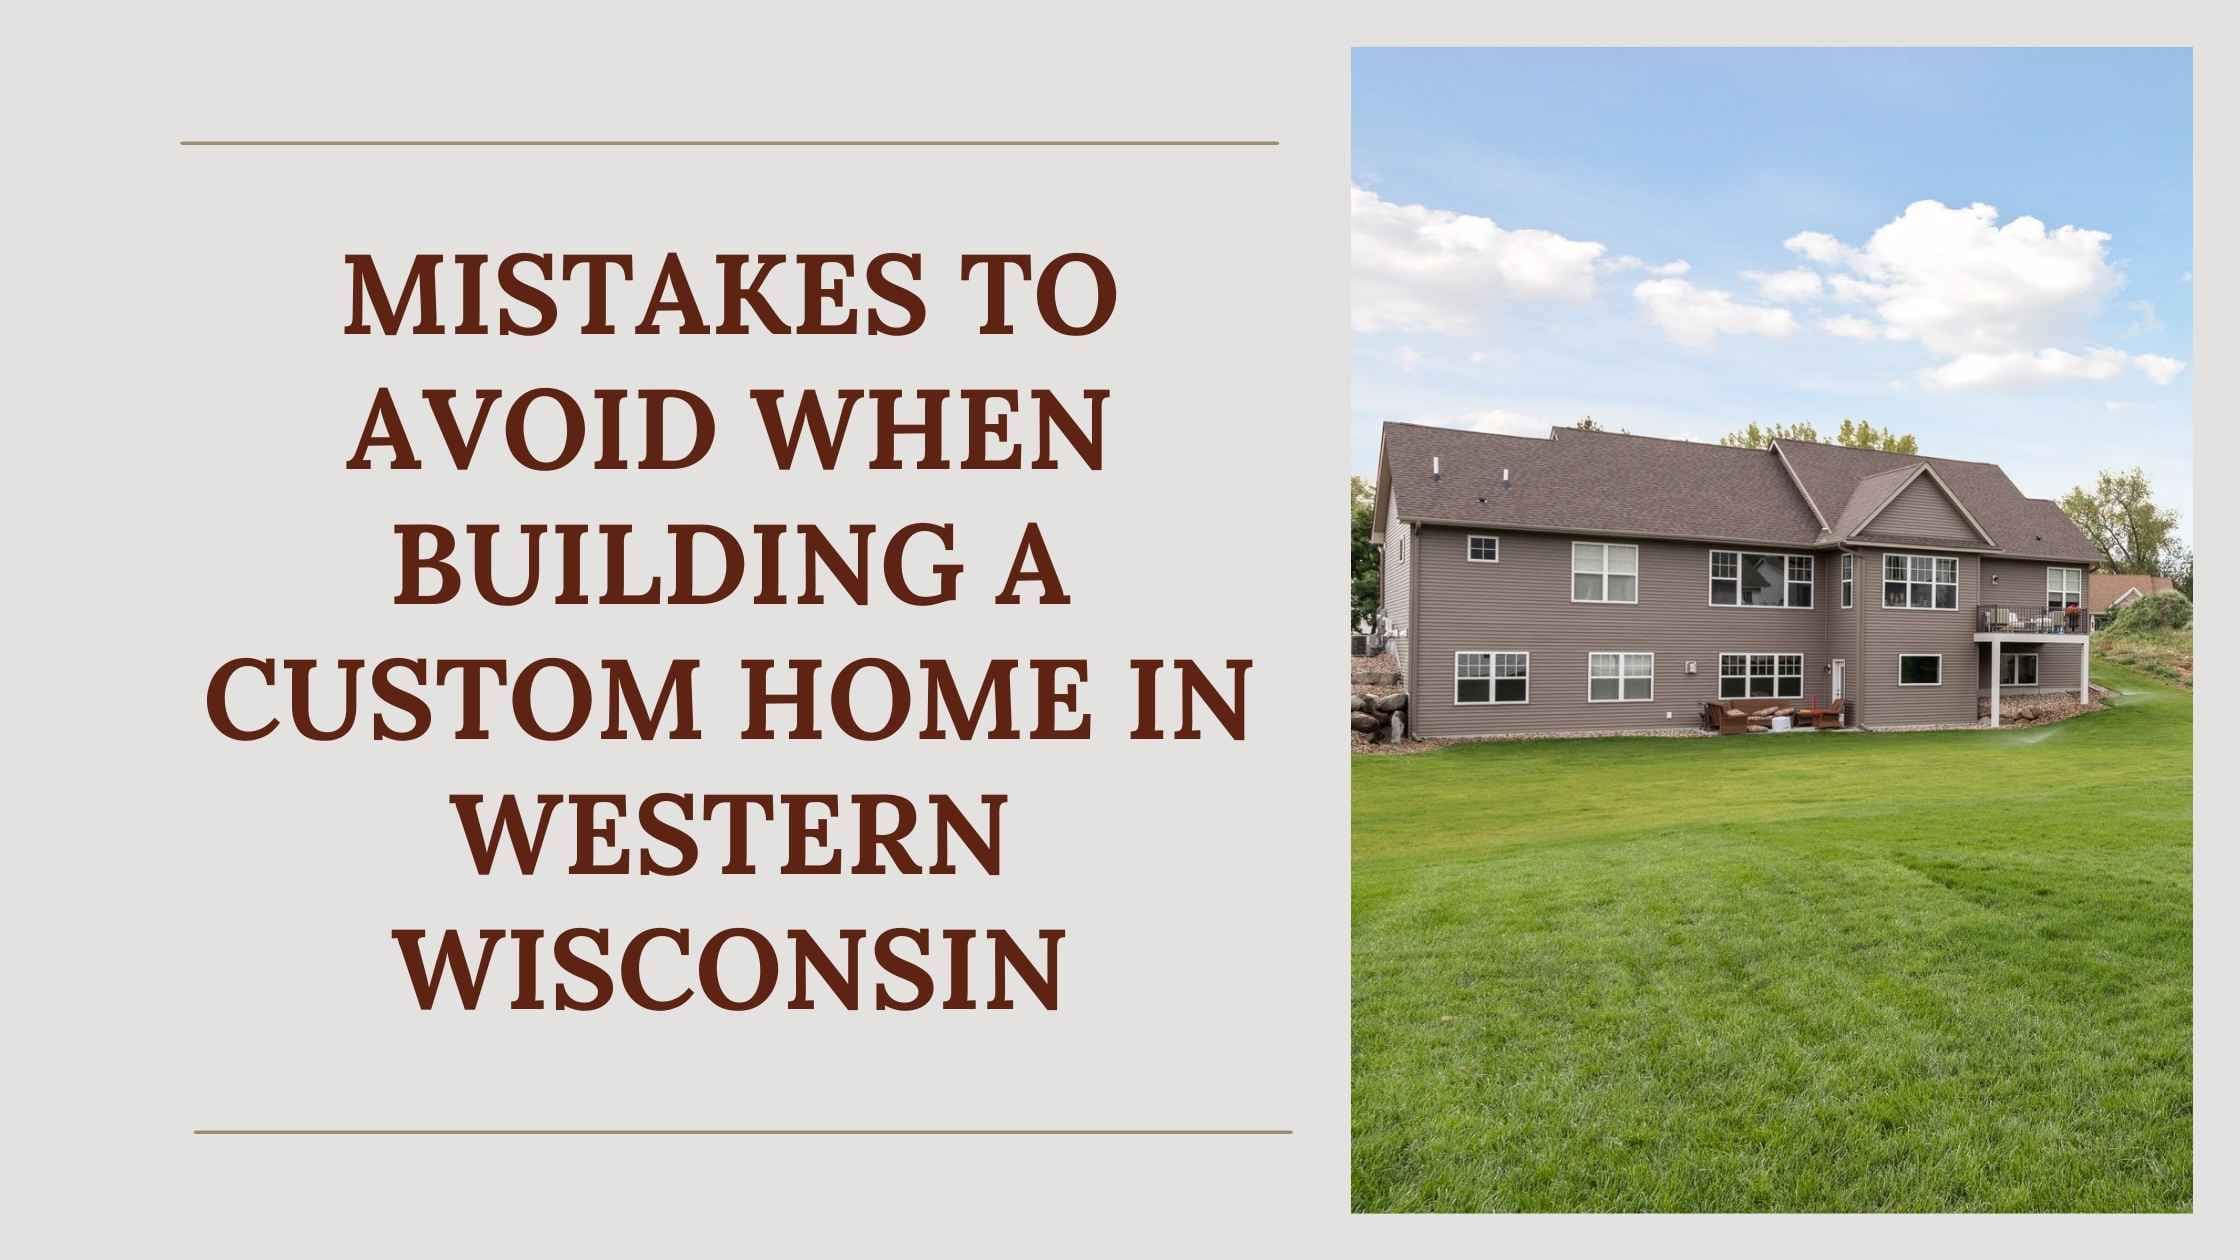 Mistakes to Avoid When Building a Custom Home in Western Wisconsin